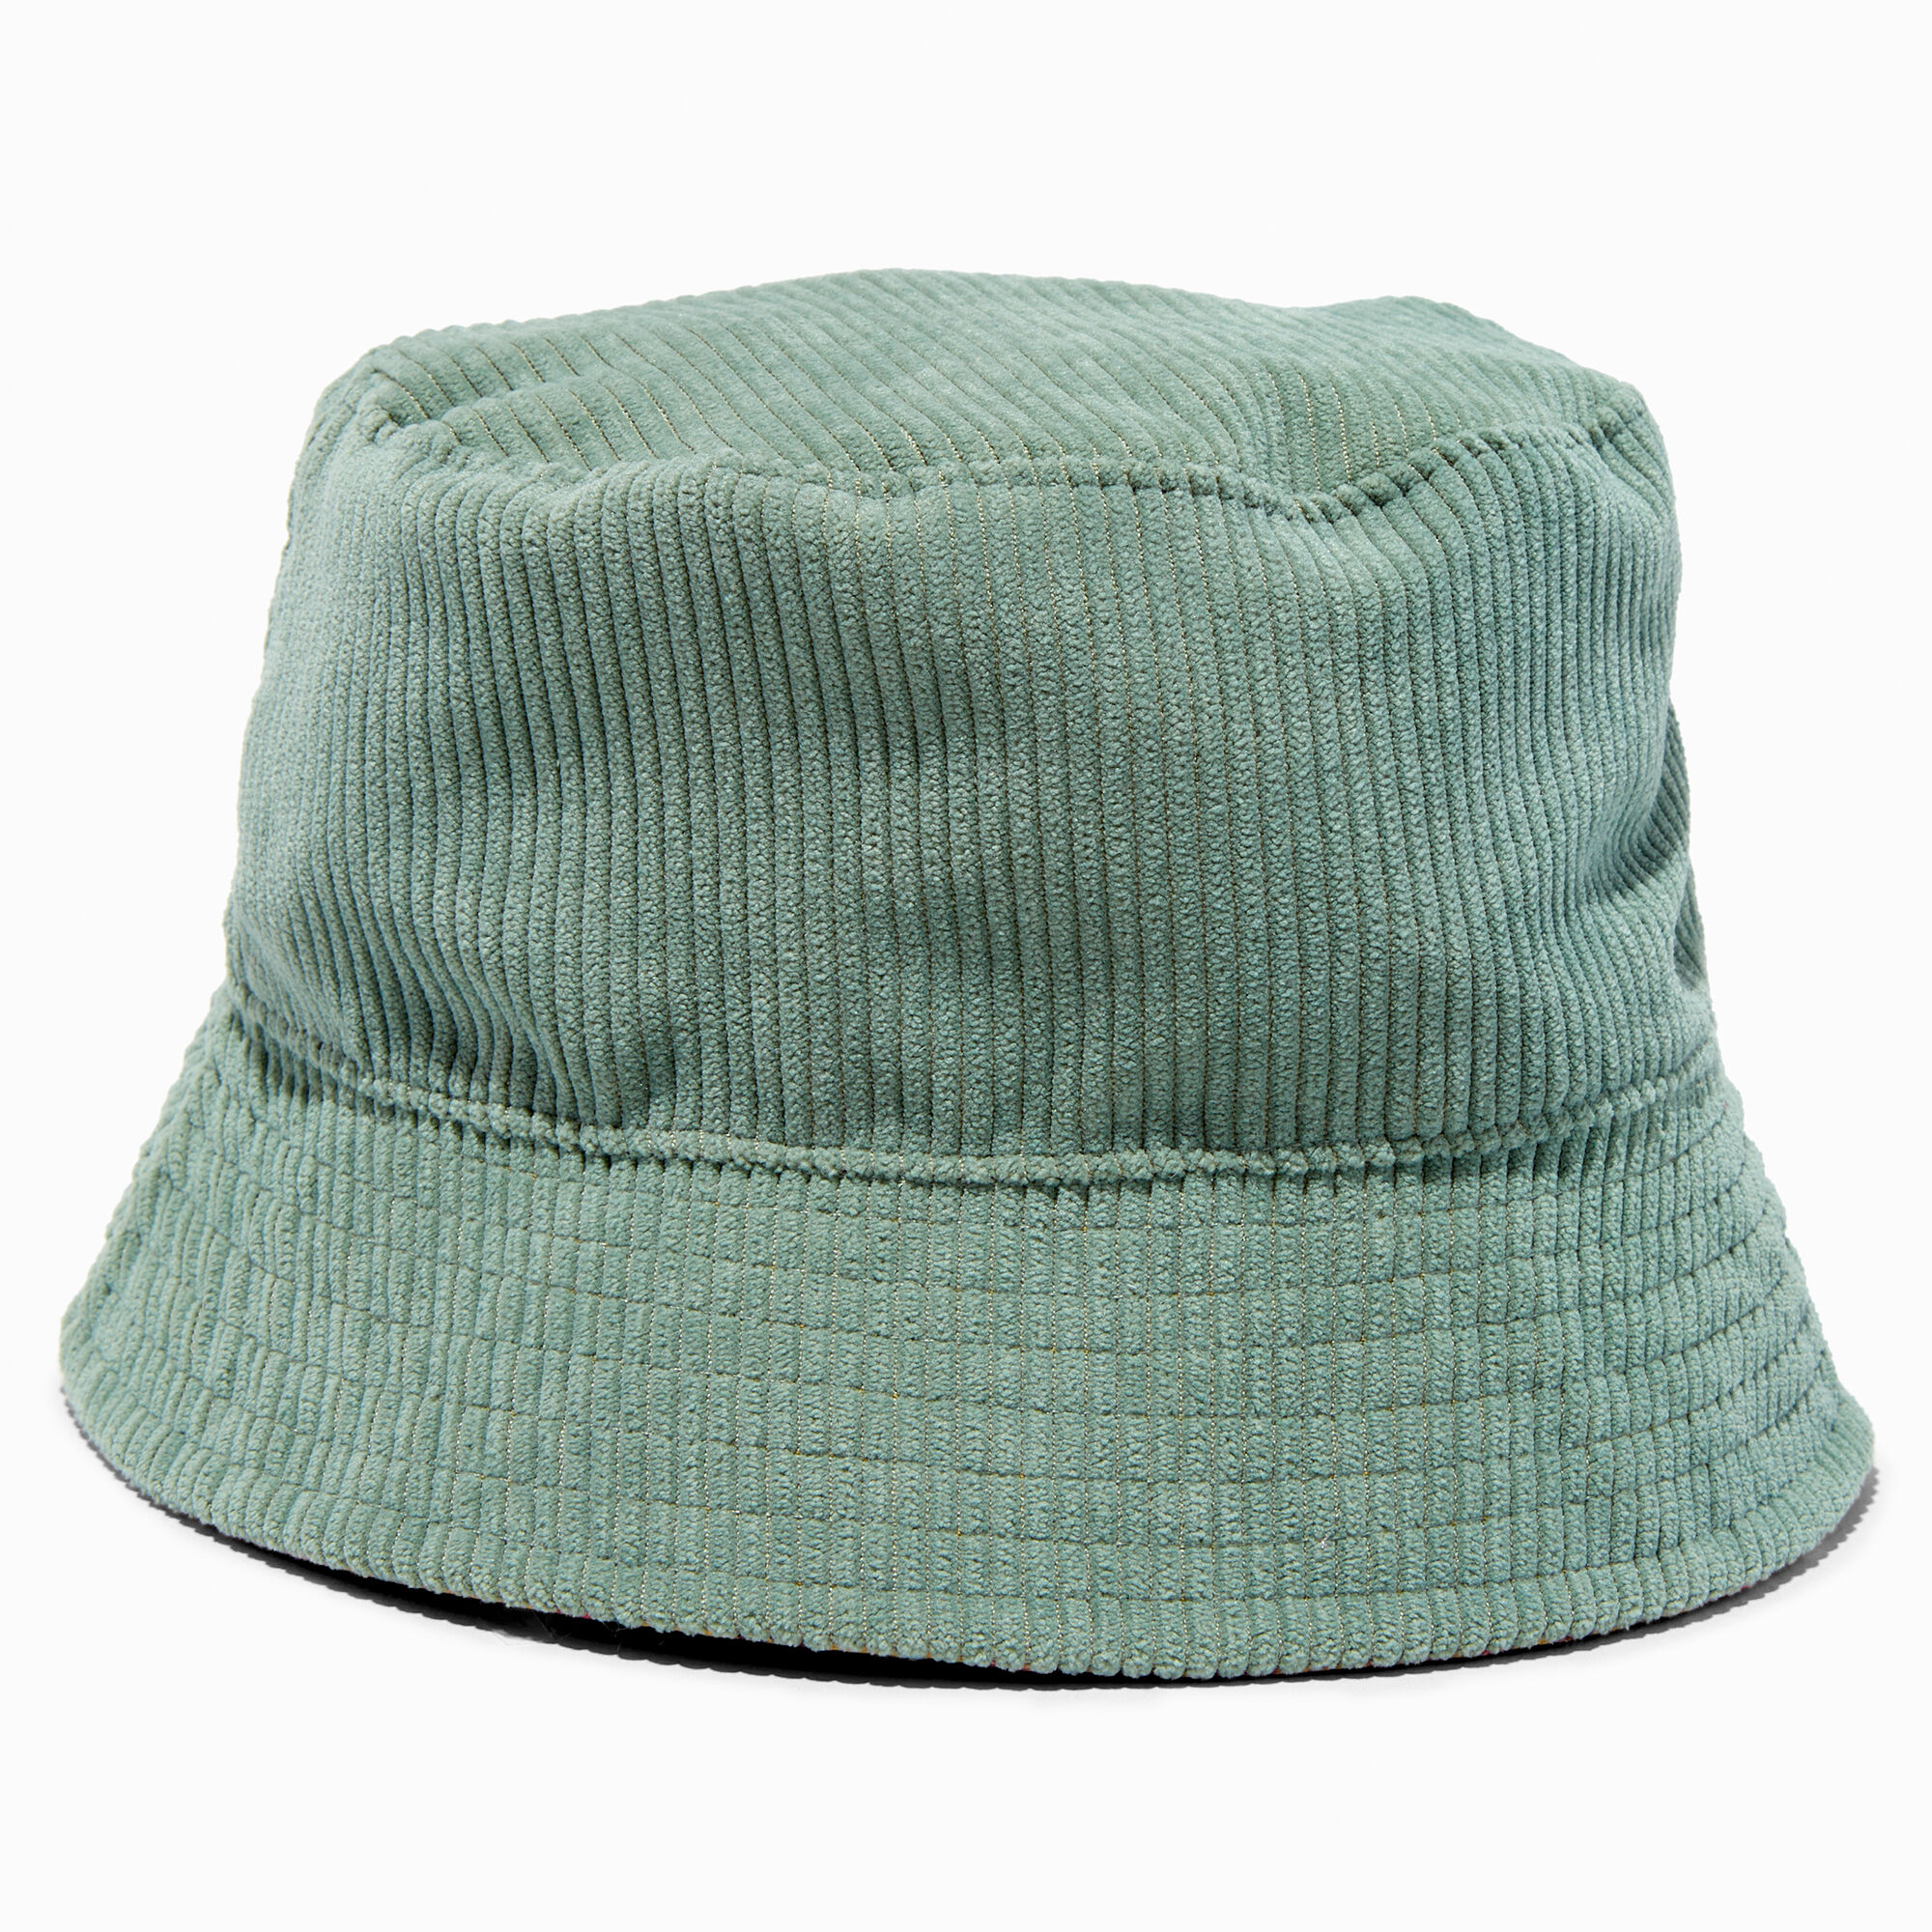 View Claires Club Corduroy Bucket Hat Mint information